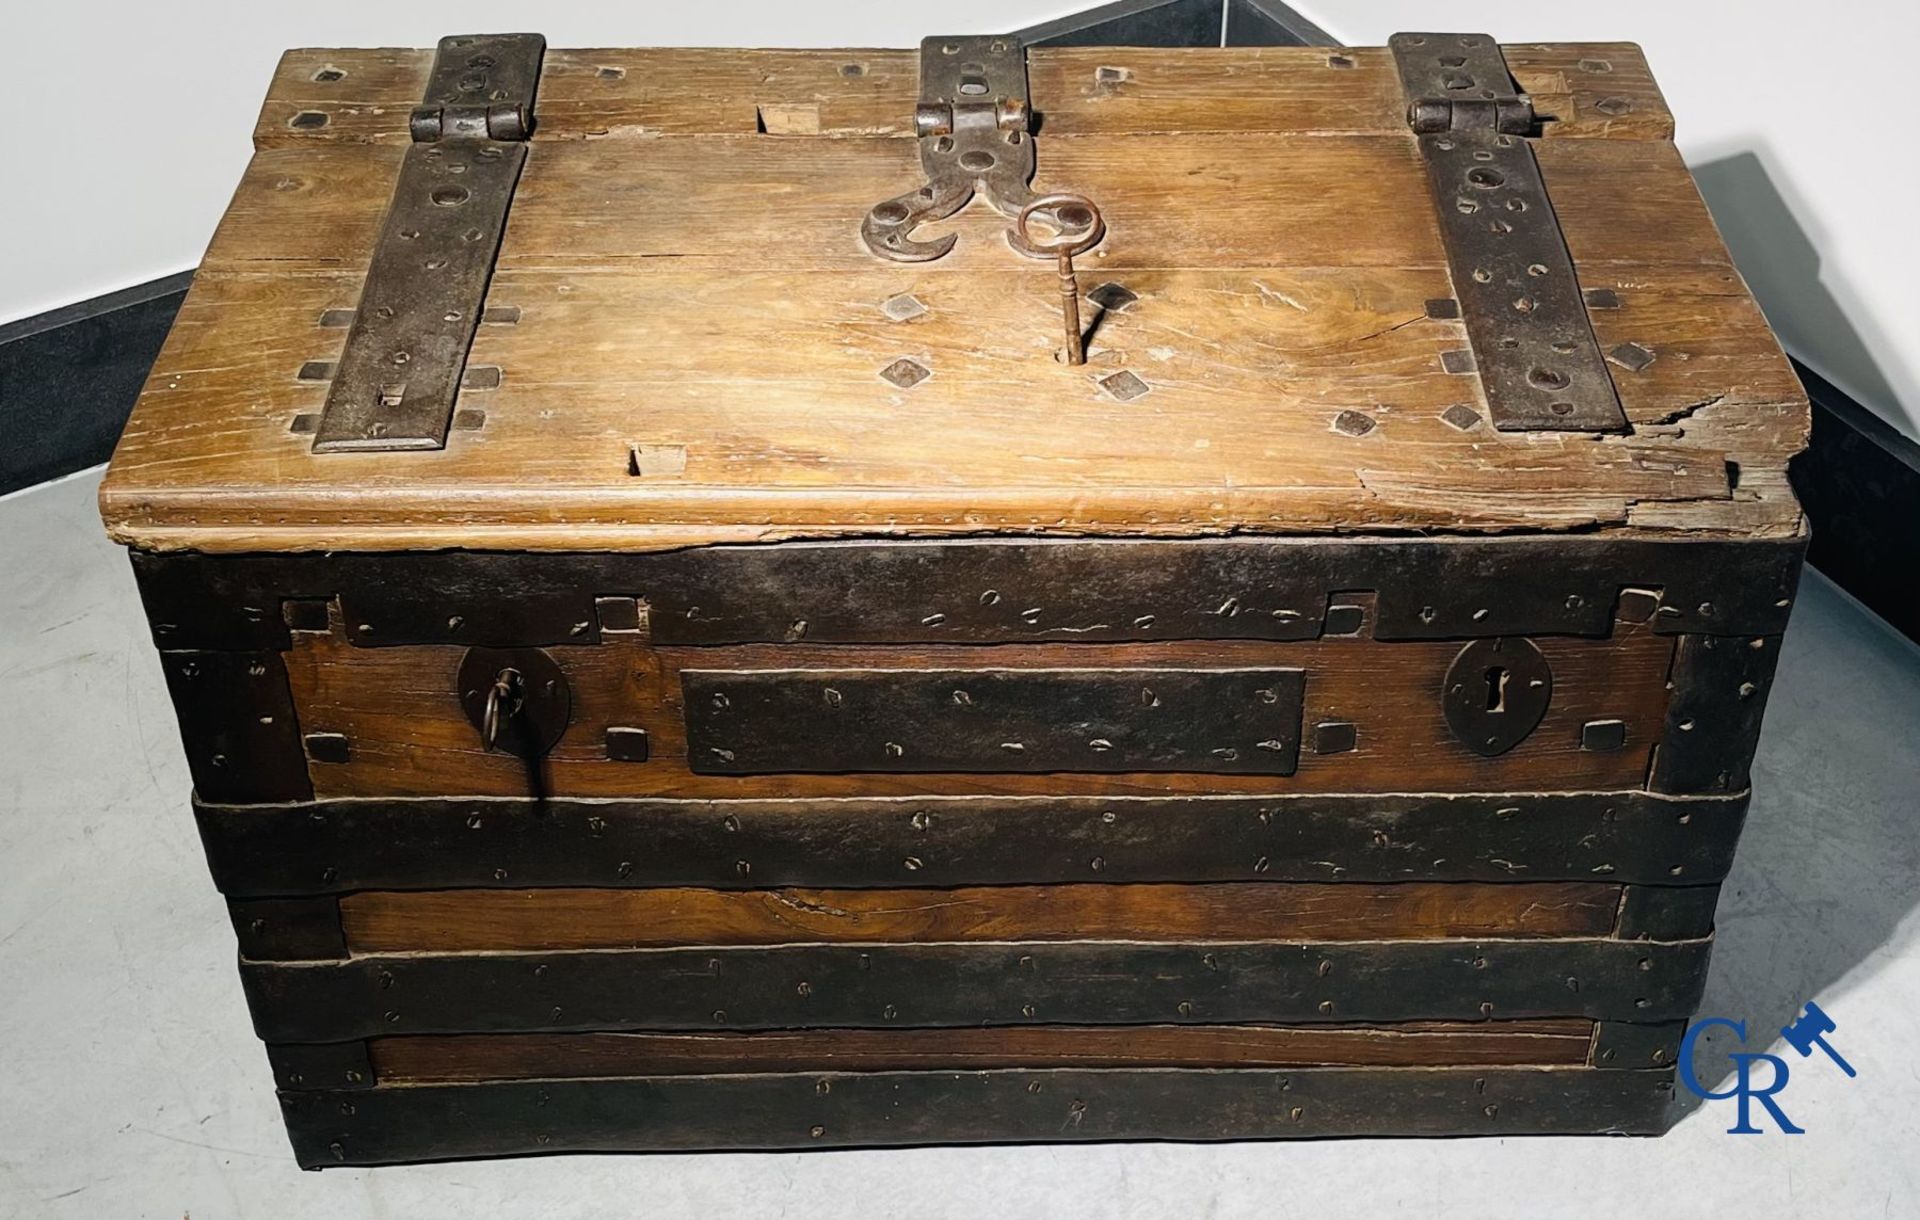 Antique wooden chest with hardware and lockwork in forging. - Image 10 of 21